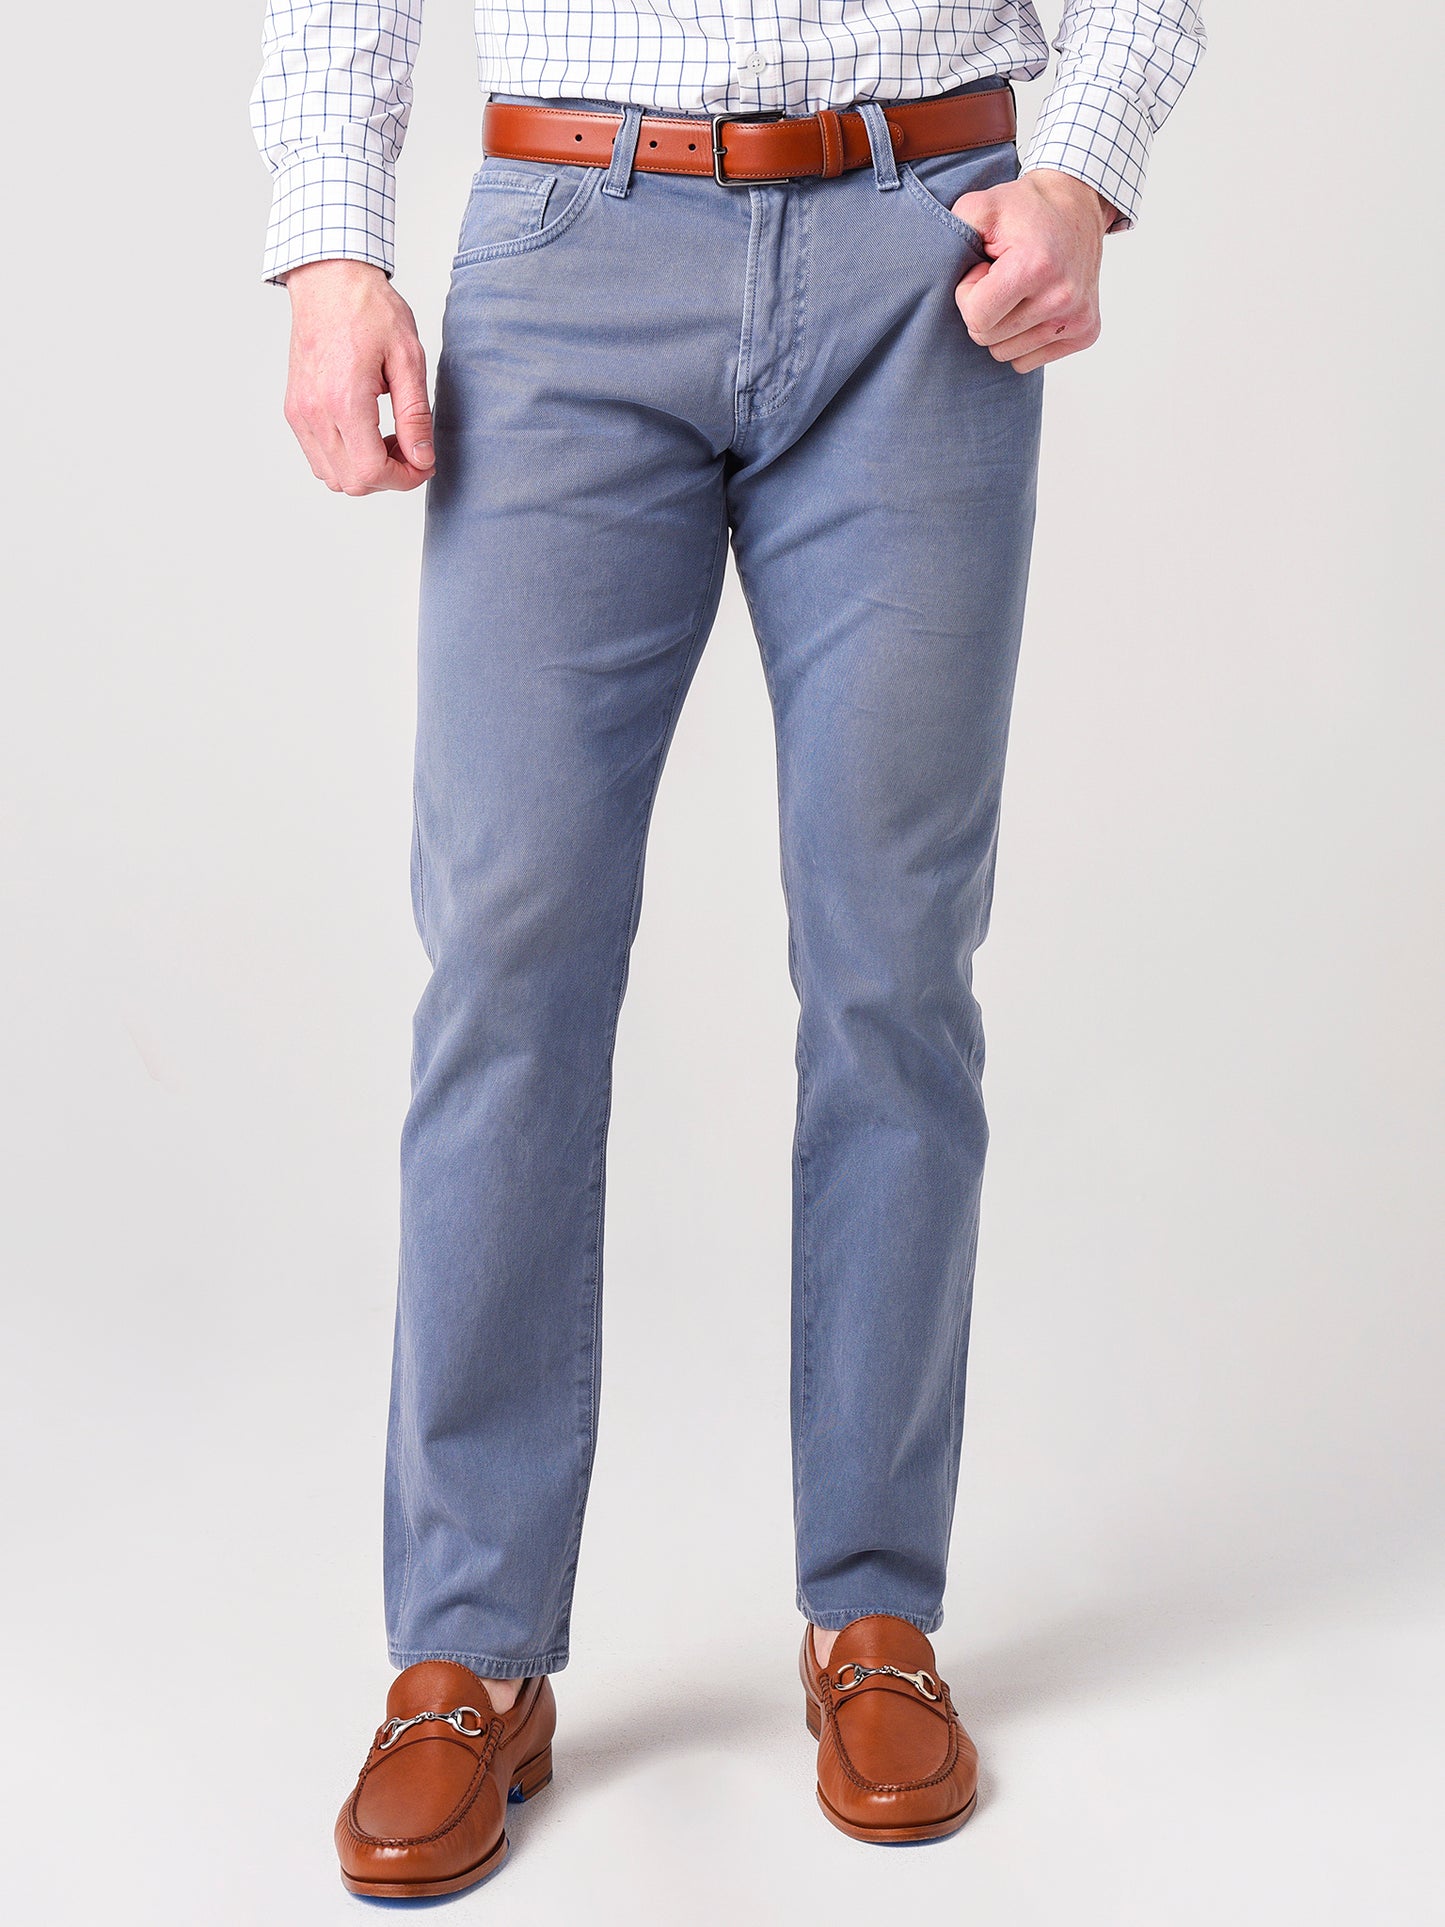 Citizens Of Humanity Men's Adler Tapered Classic